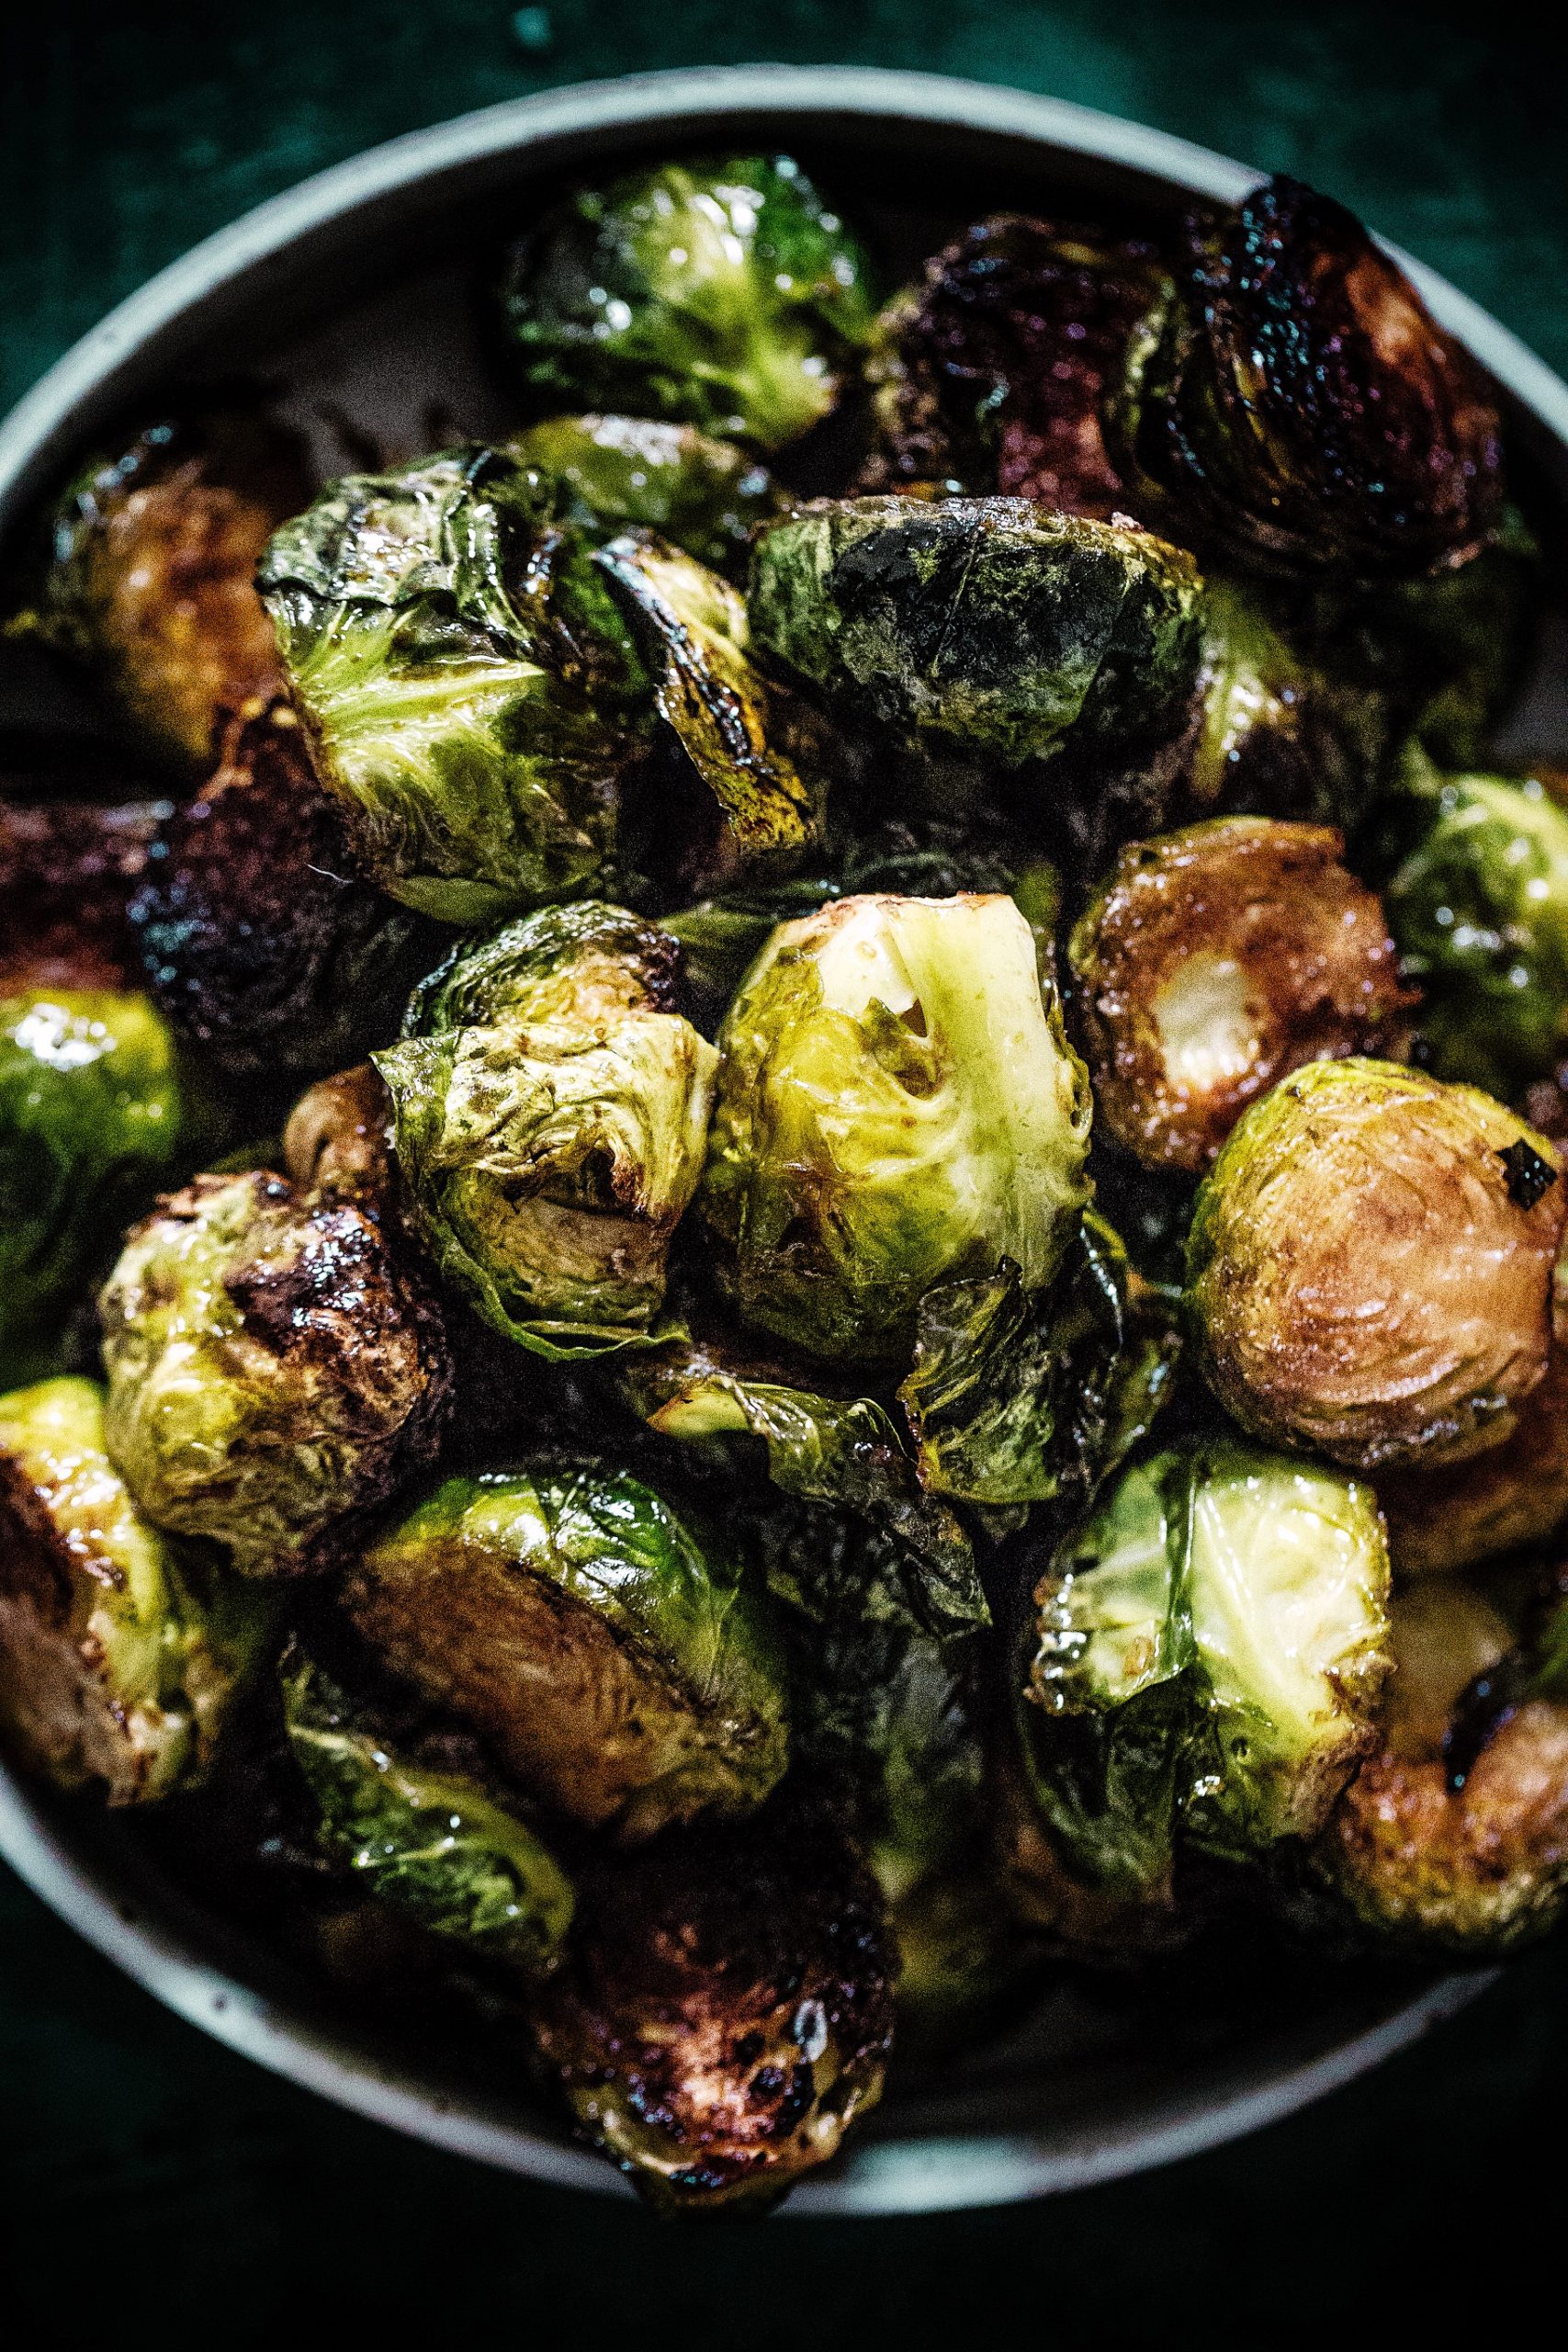 Balsamic & Honey Soaked Brussels sprouts